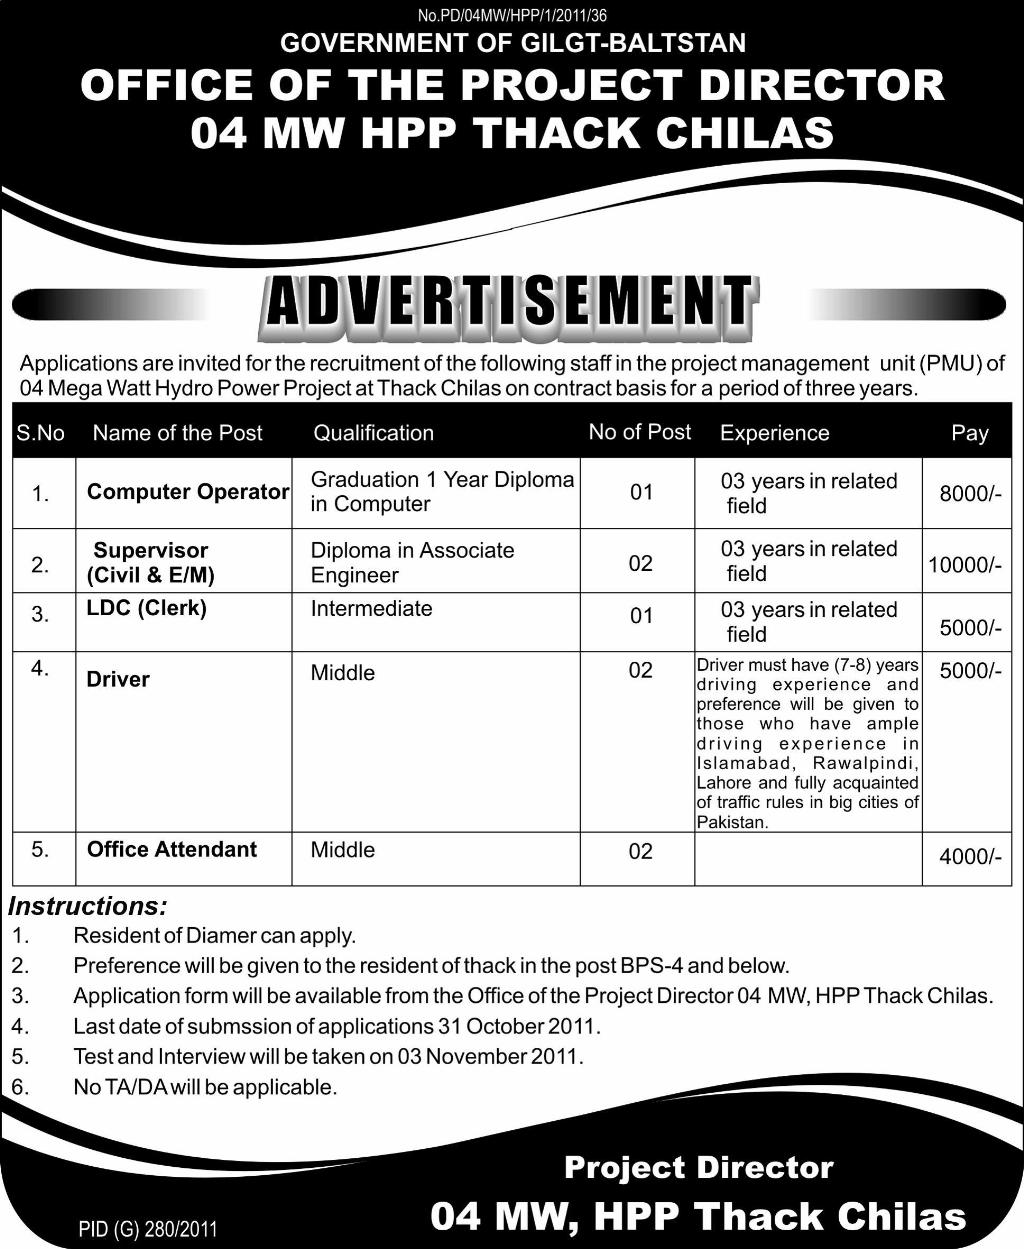 Office of the Project Director 04 MW HPP Thack Chilas Job Opportunities